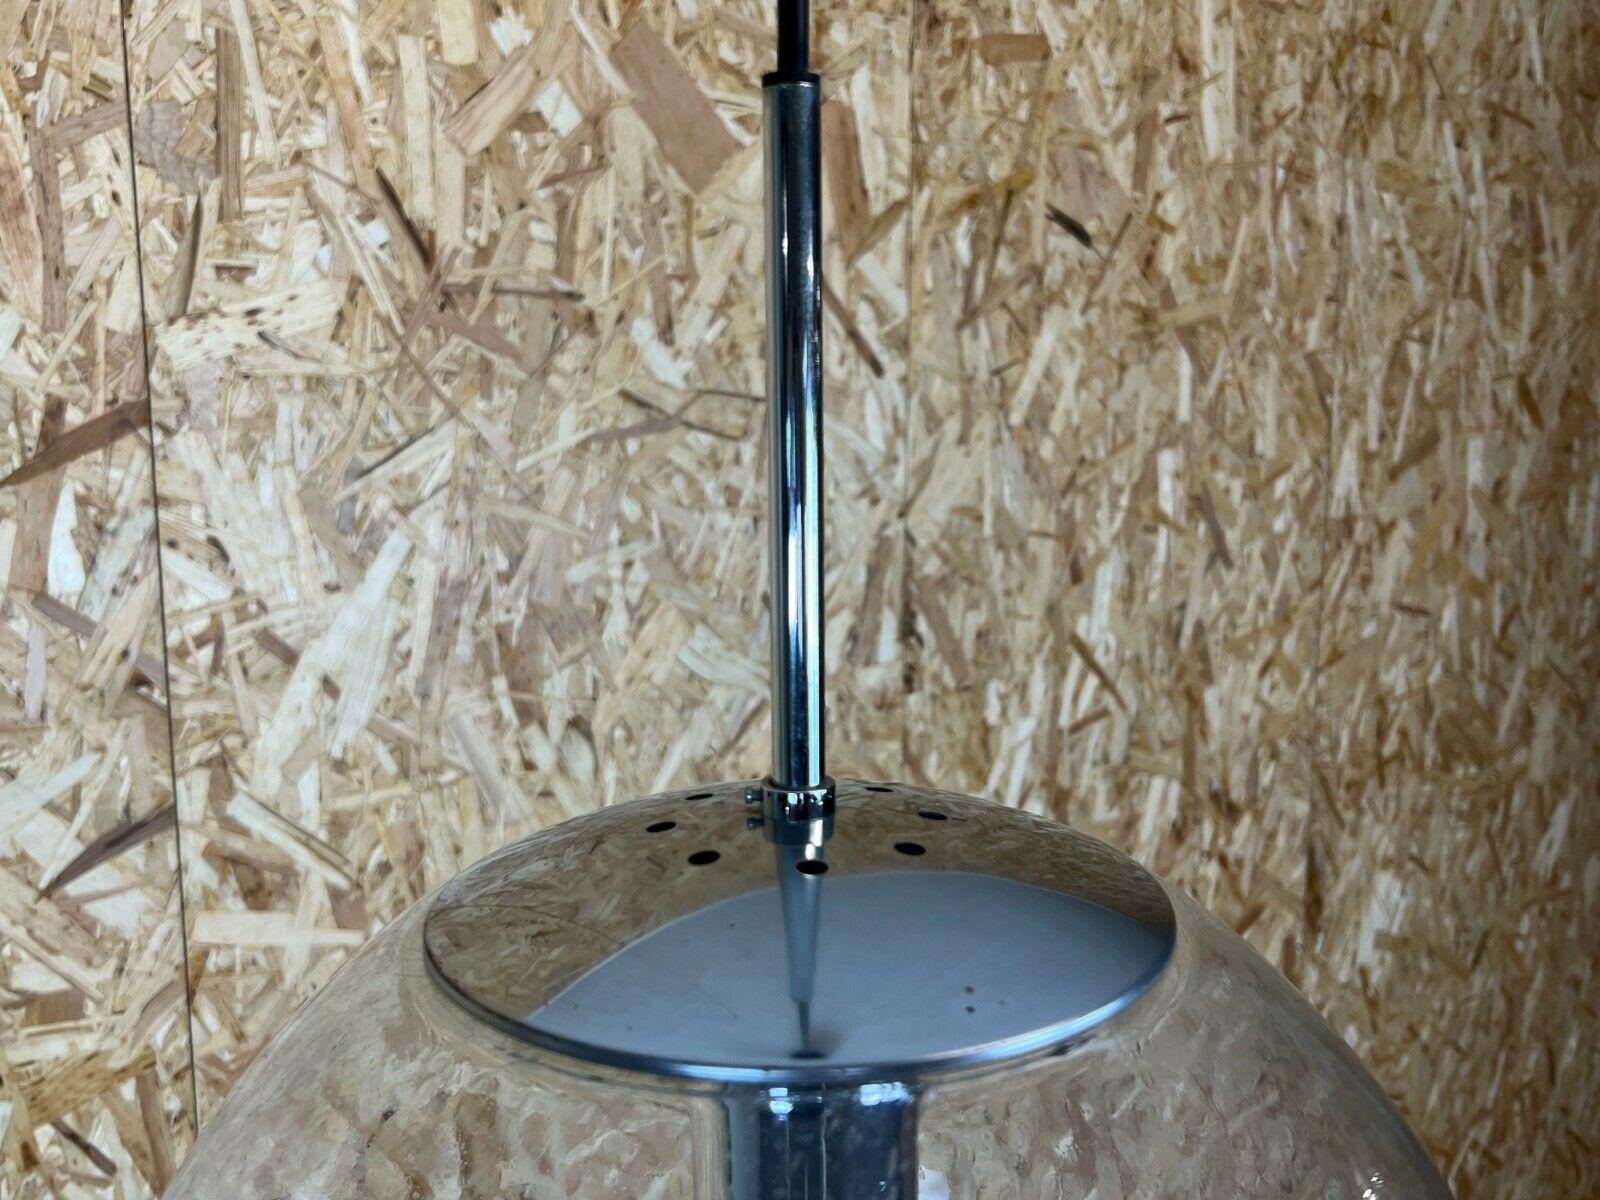 XL 60s 70s Lamp Light Ceiling Lamp Limburg Spherical Lamp Ball Design In Good Condition For Sale In Neuenkirchen, NI